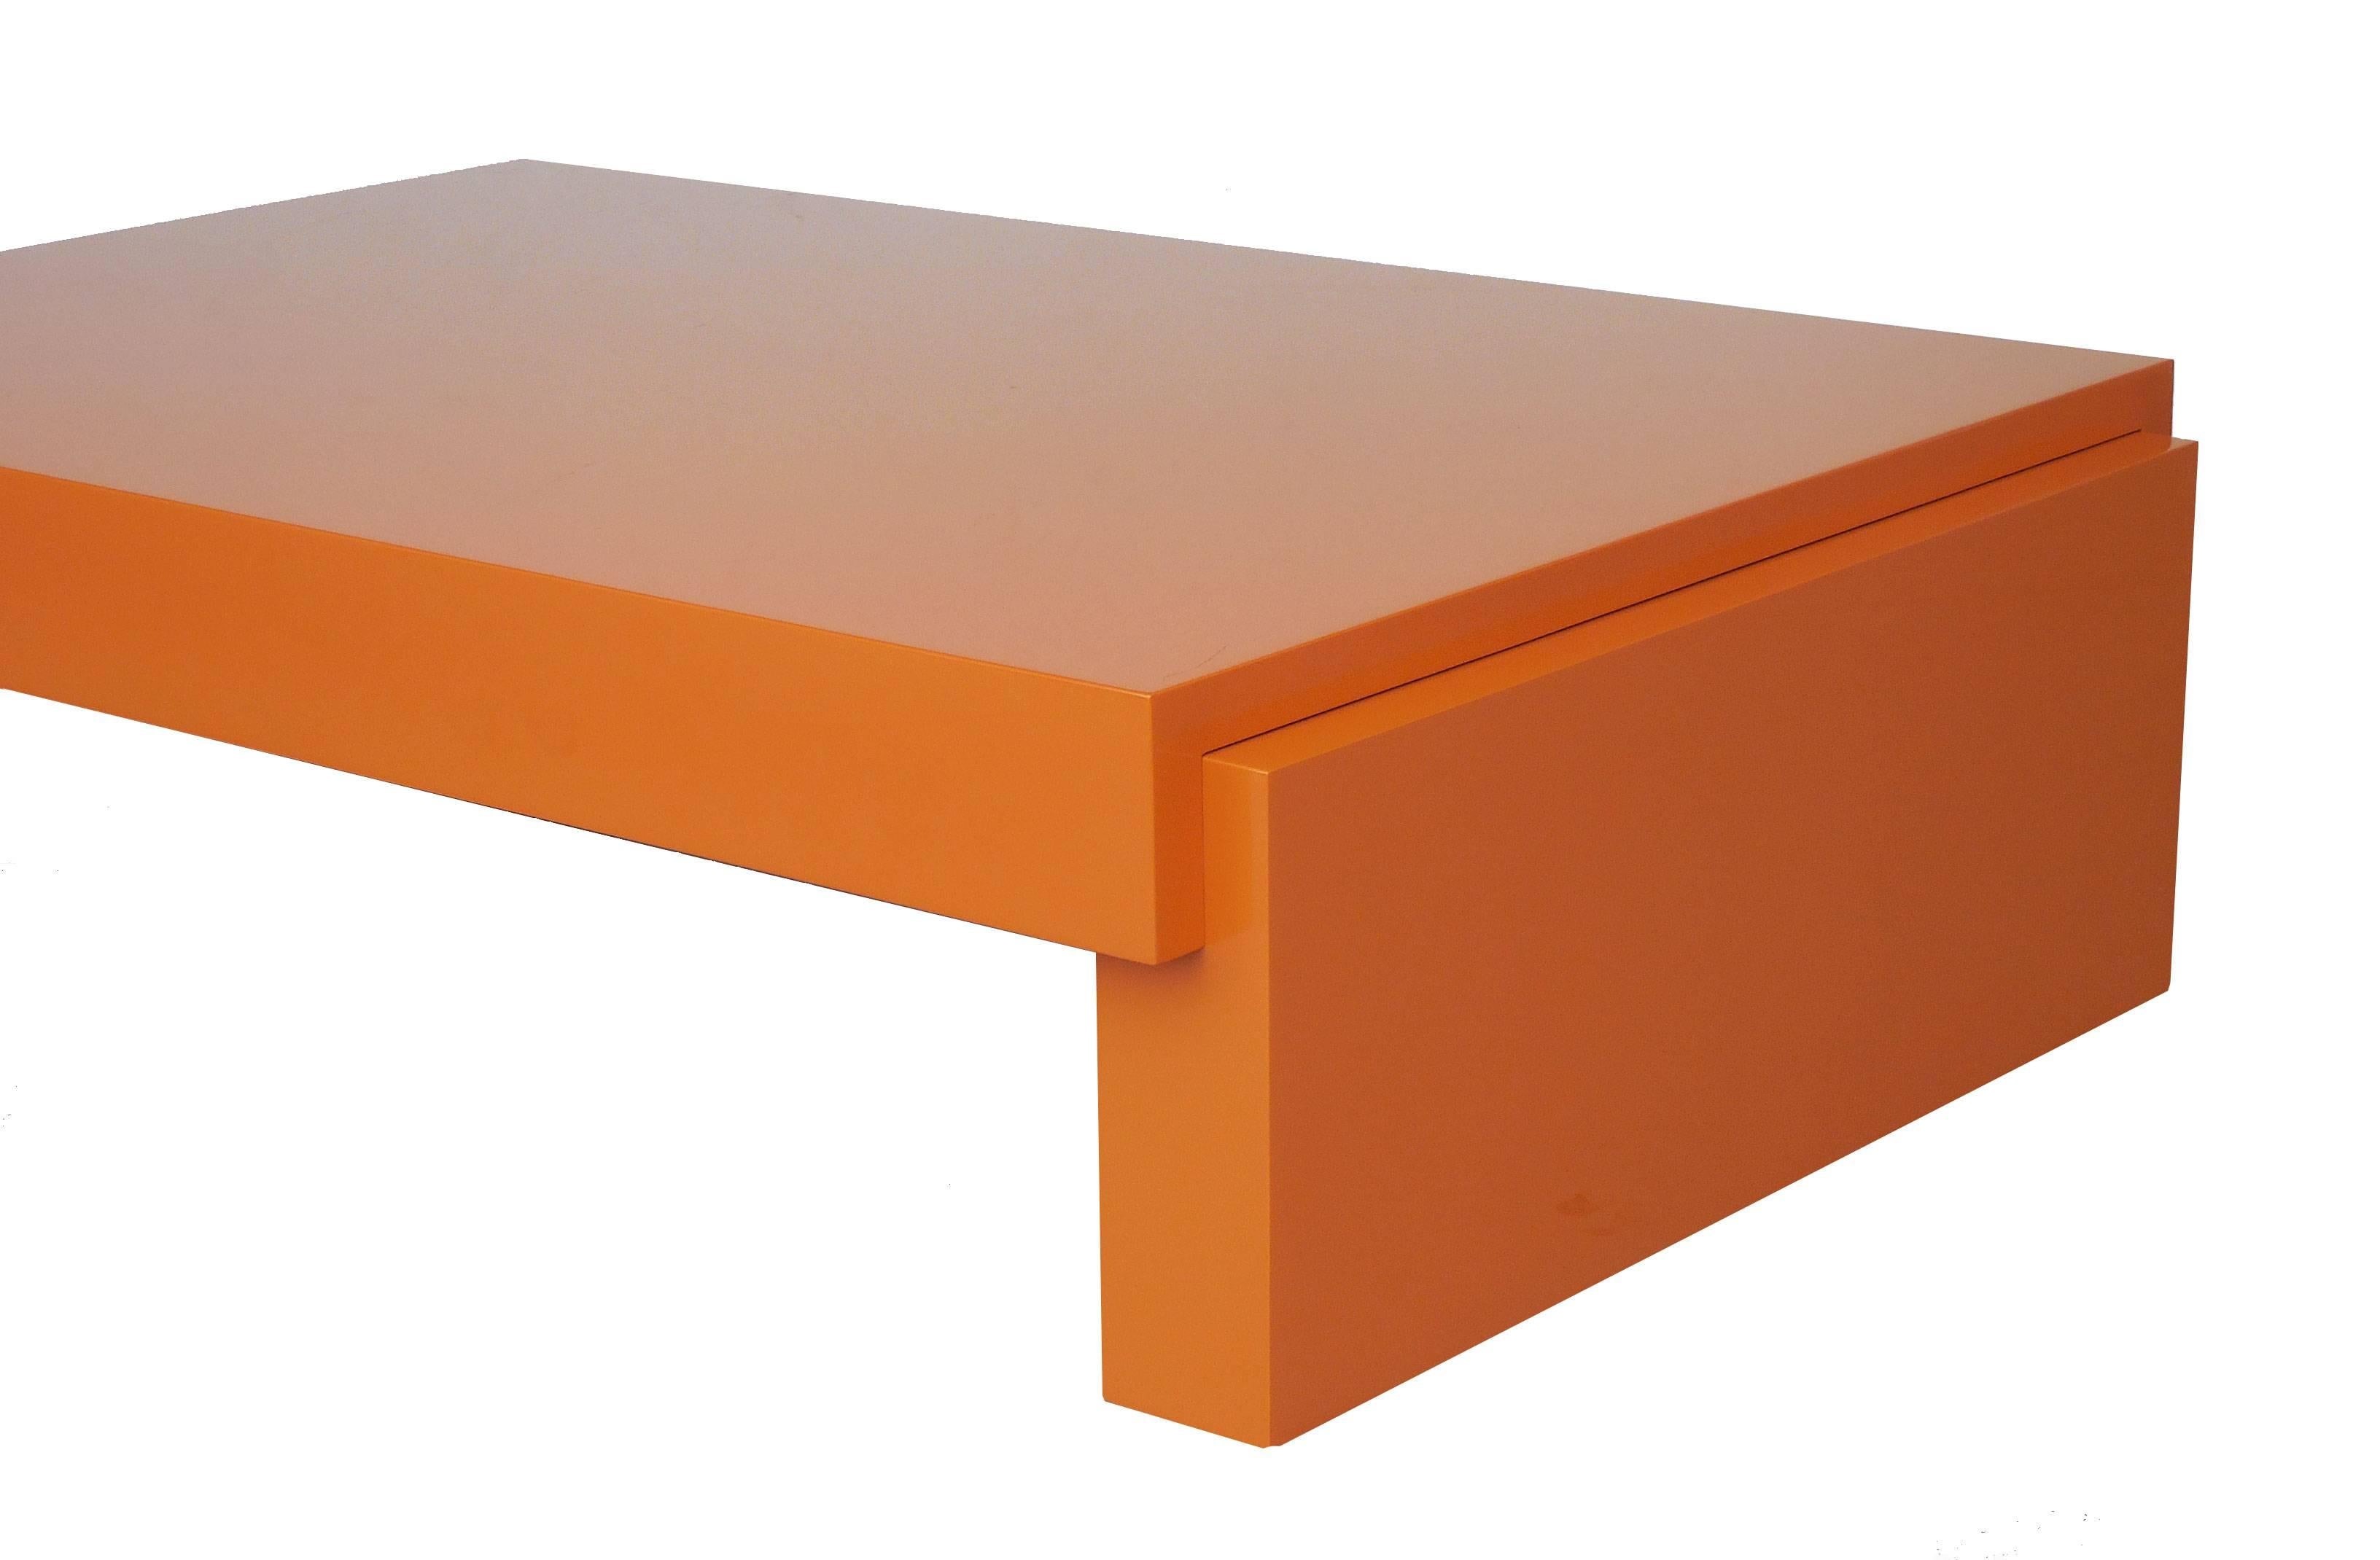 American Karl Springer Lacquer Airport Coffee Table, 1980